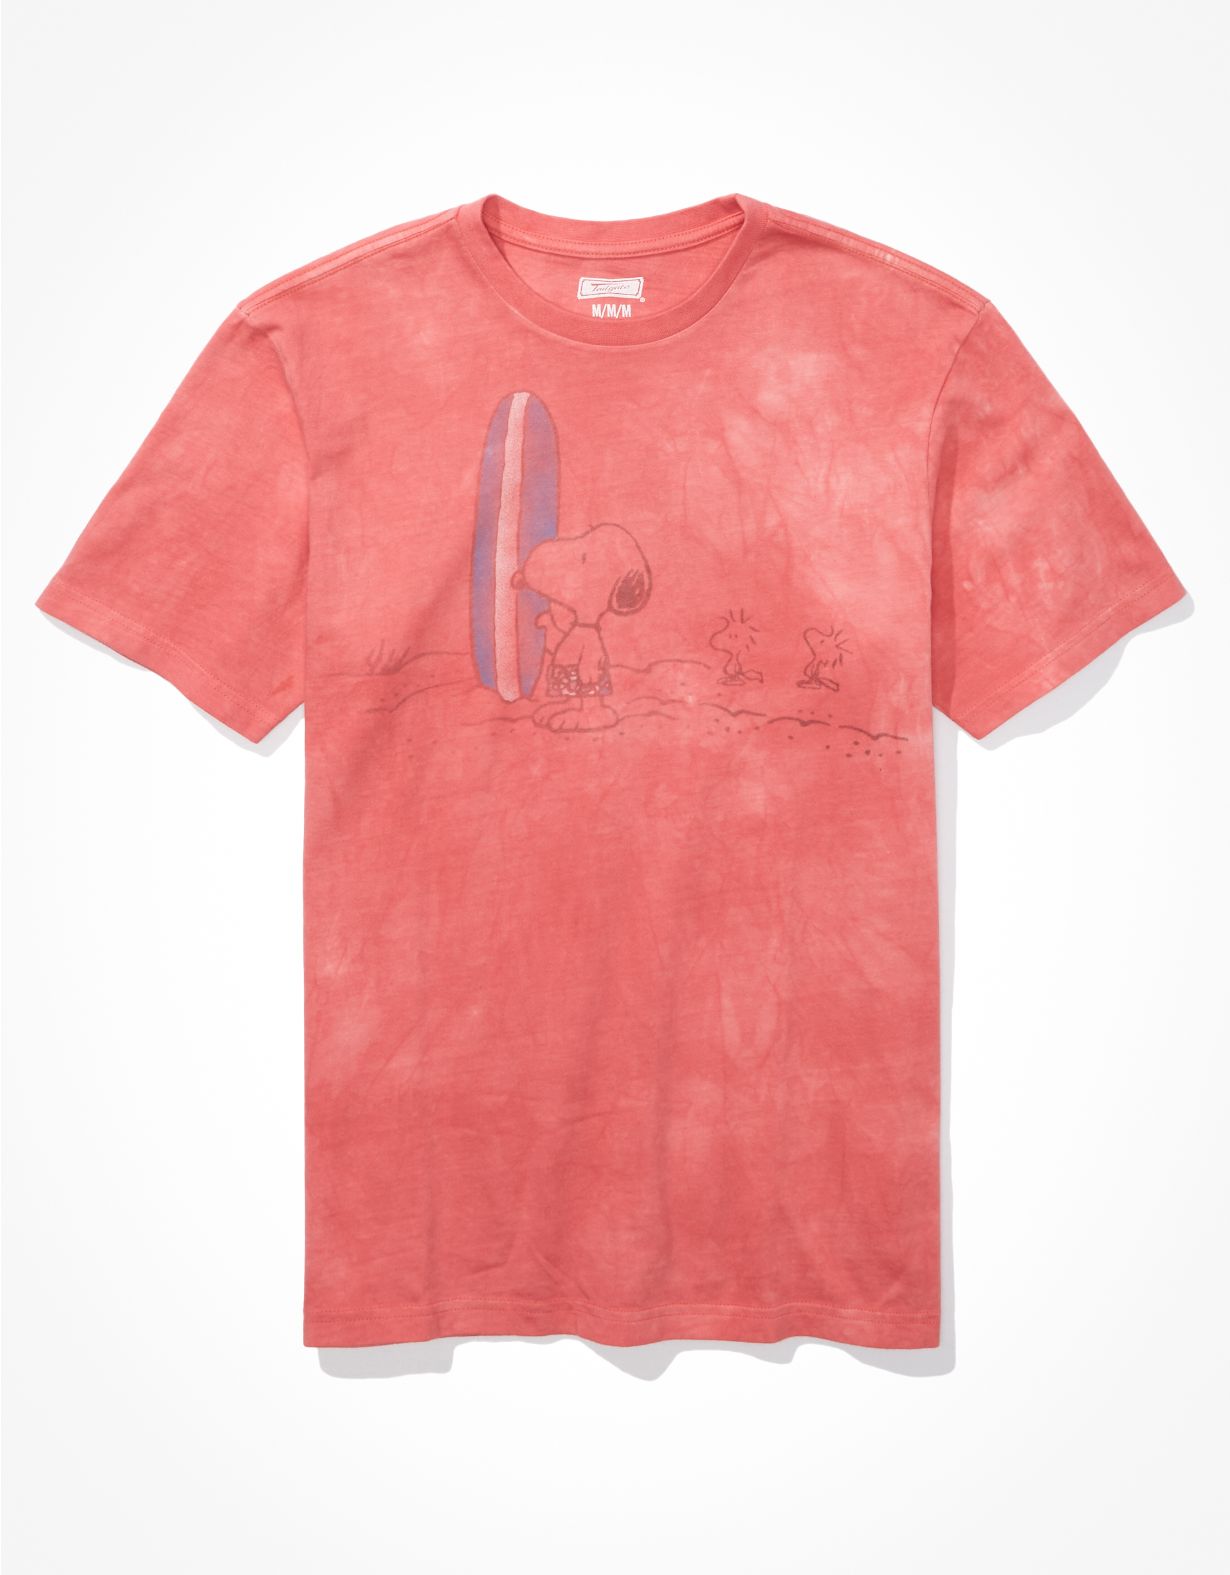 Tailgate for Surfrider Men's Tie-Dye Snoopy Graphic T-Shirt